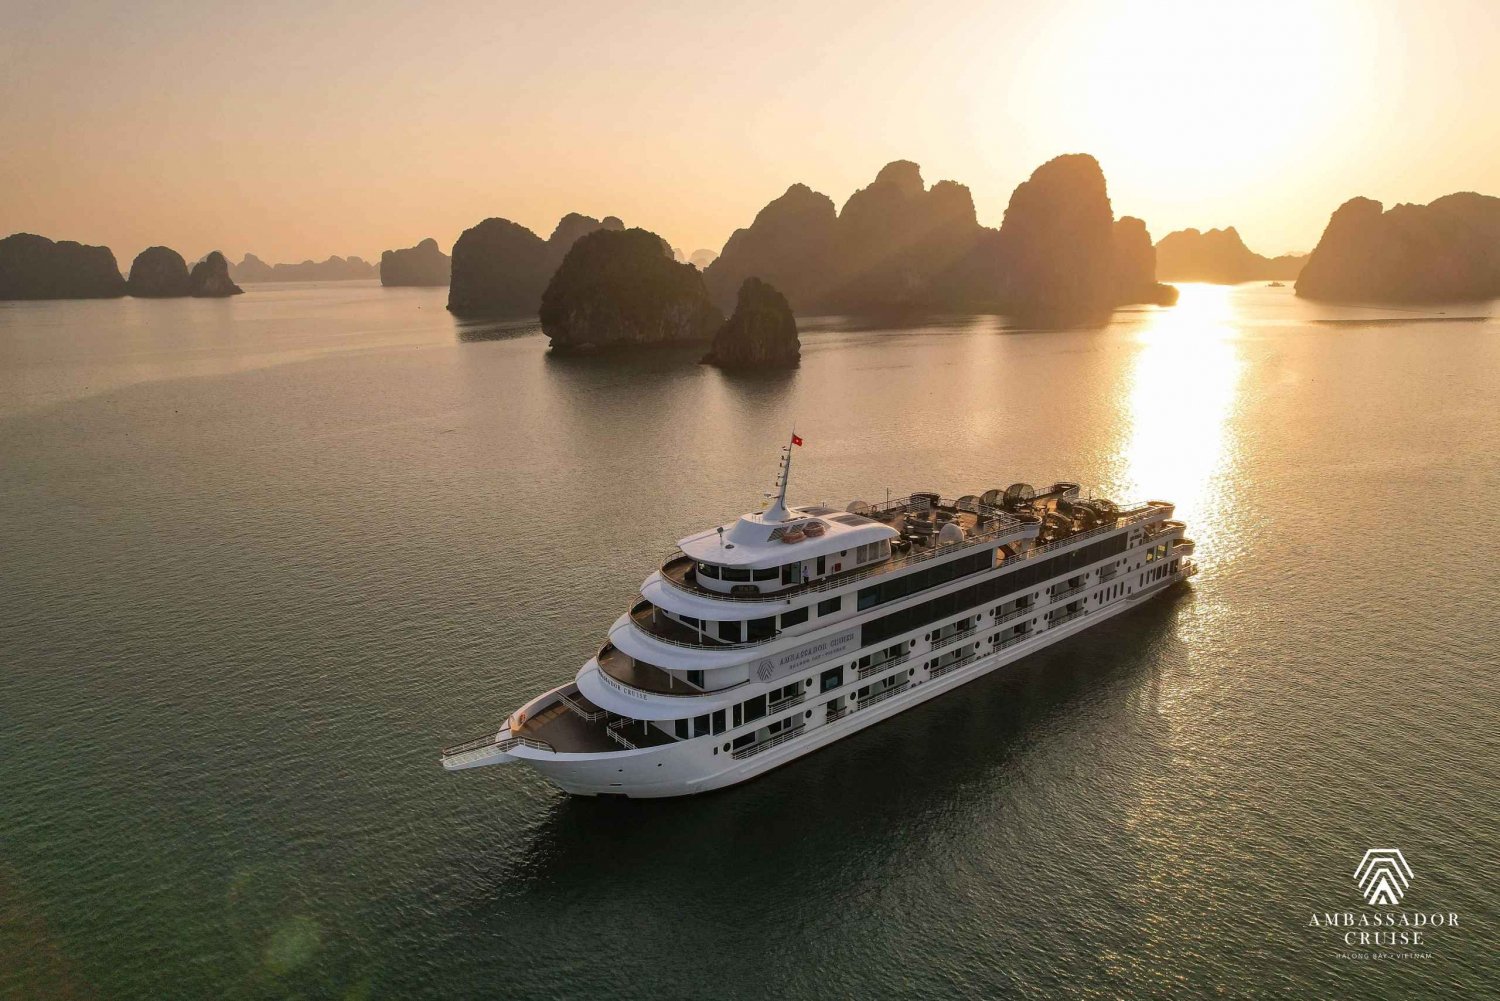 Ambassador Day Cruise- The Best Day Cruise in Halong Bay